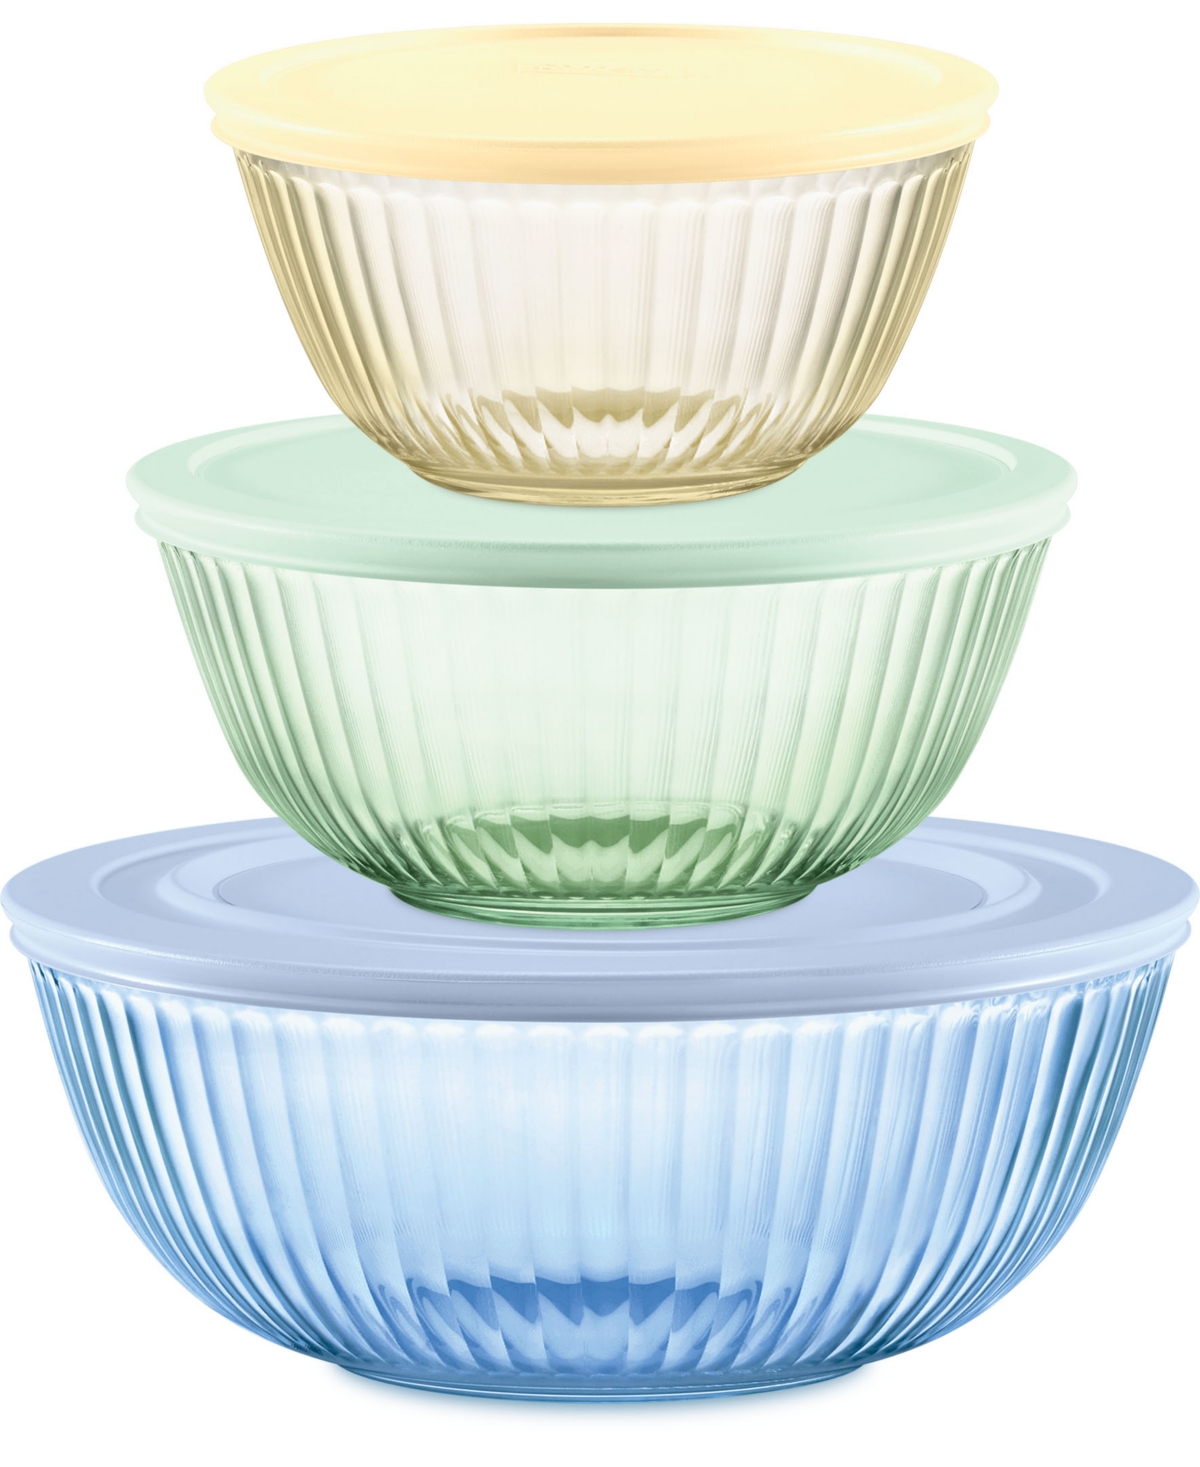 Pyrex Colors Sculpted, Tinted Dreams 6-pc Mixing Bowl Set In Multi